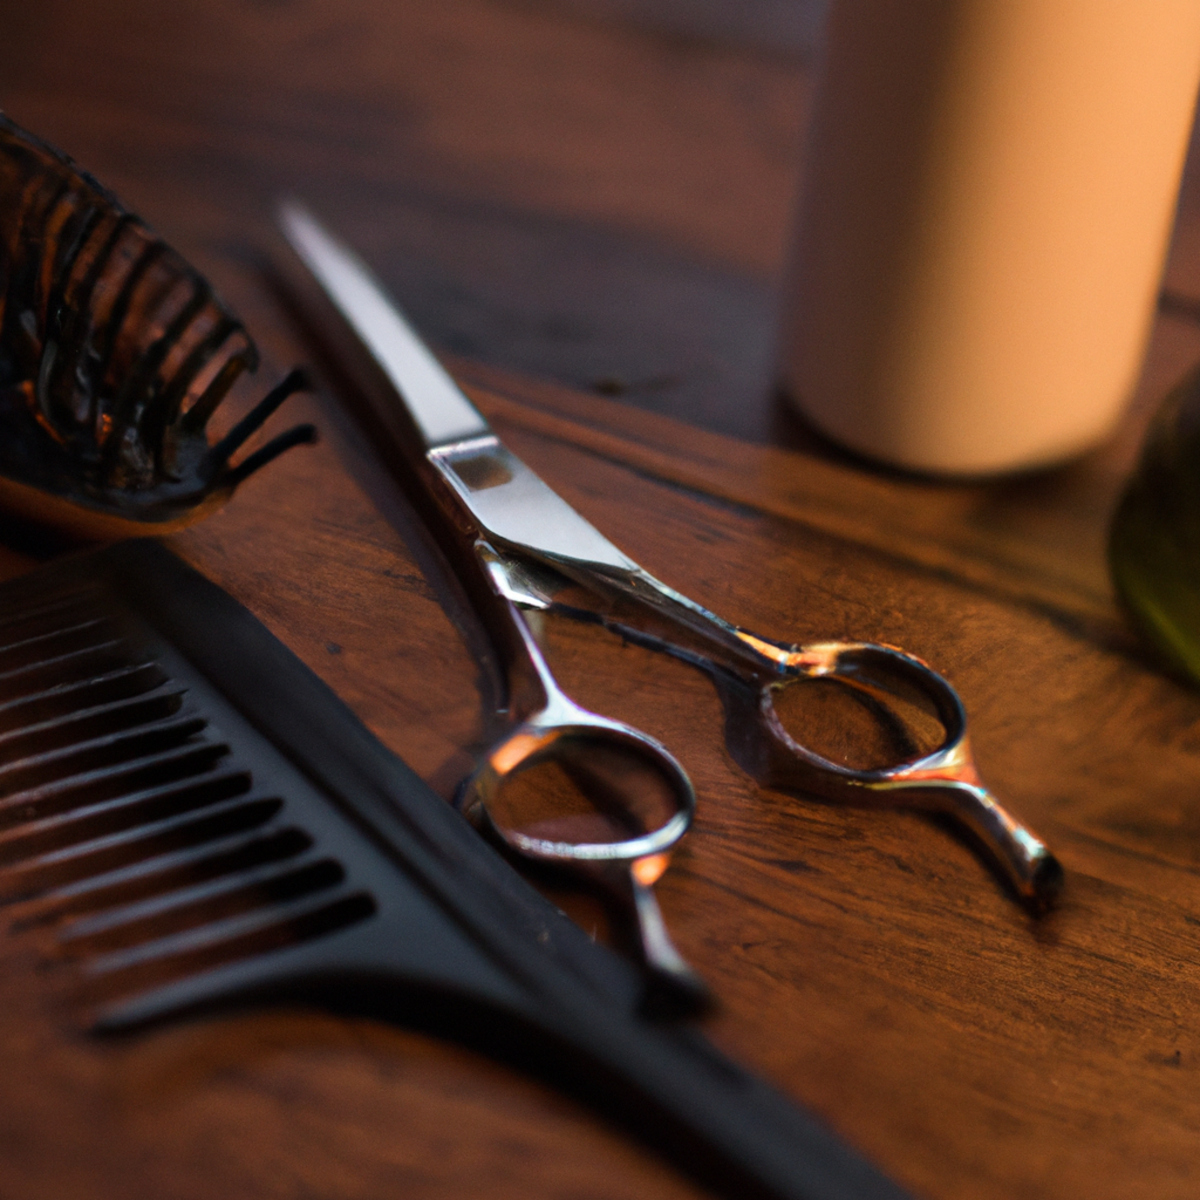 Scissors and hair care products on wooden surface.